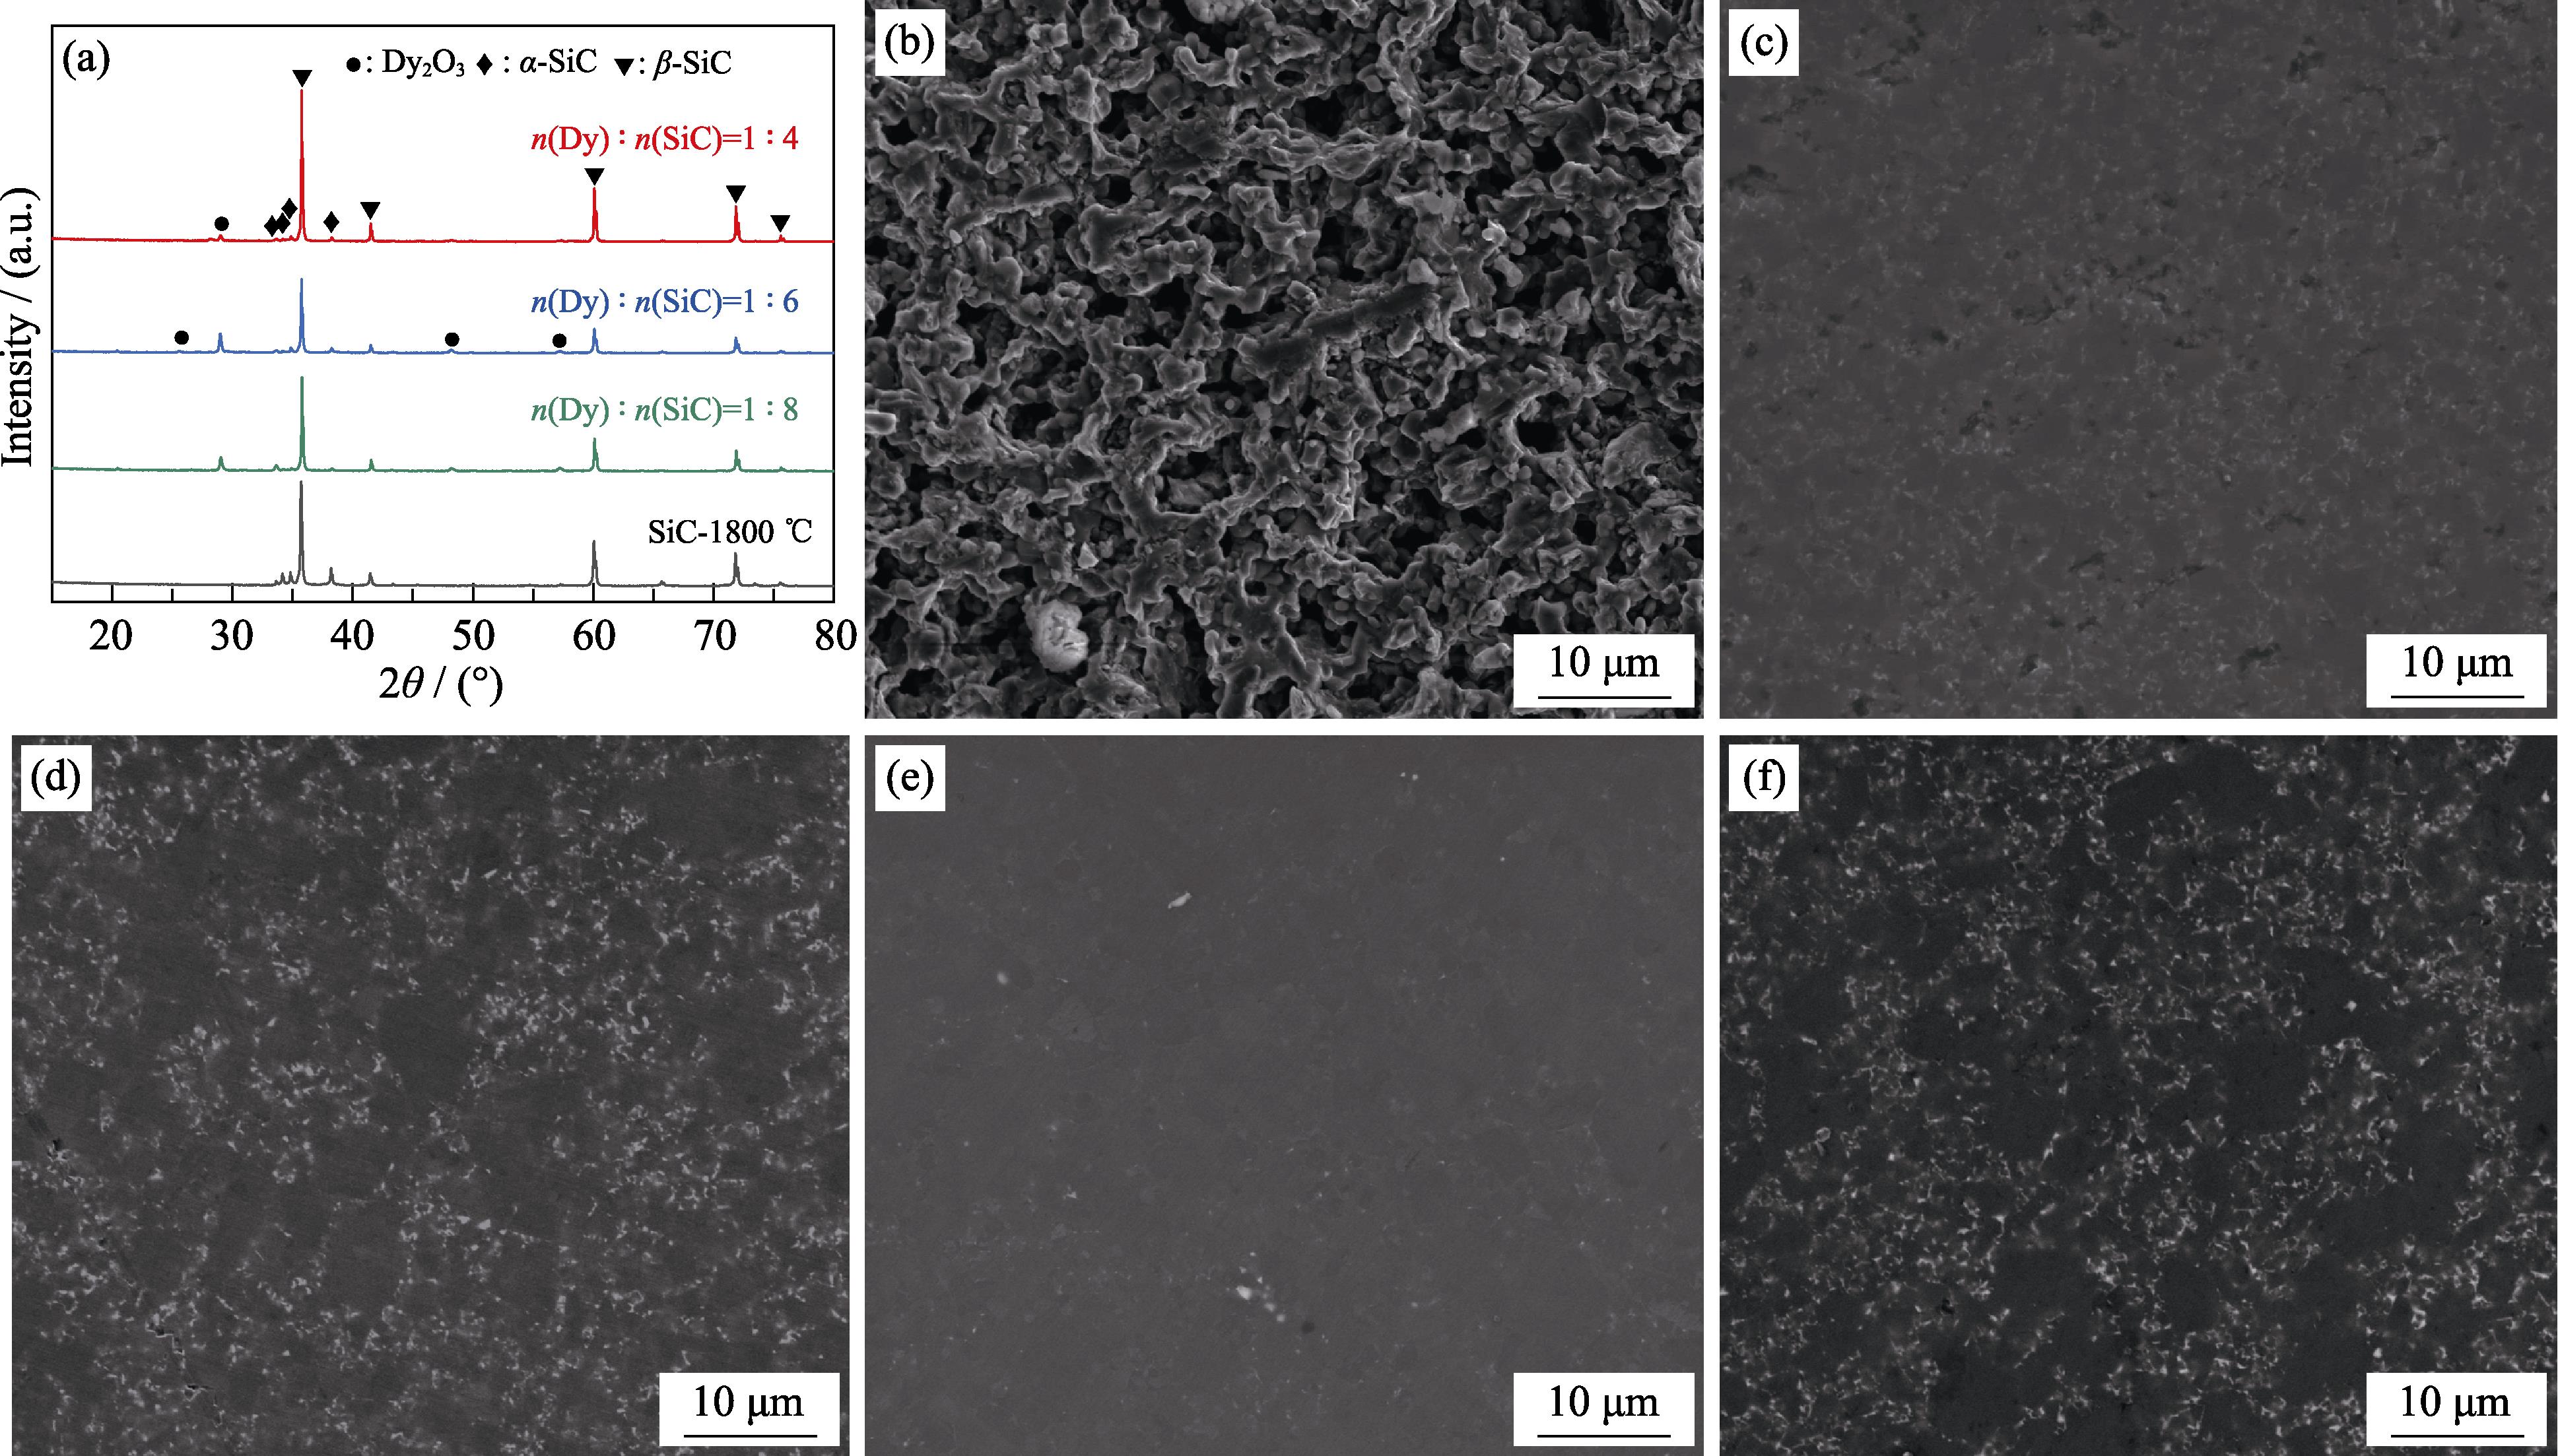 (a) XRD and (b-f) SEM images of sintered pure SiC ceramics and SiC ceramics sintered from SiC-Dy3Si2C2 raw materials with different molar ratios